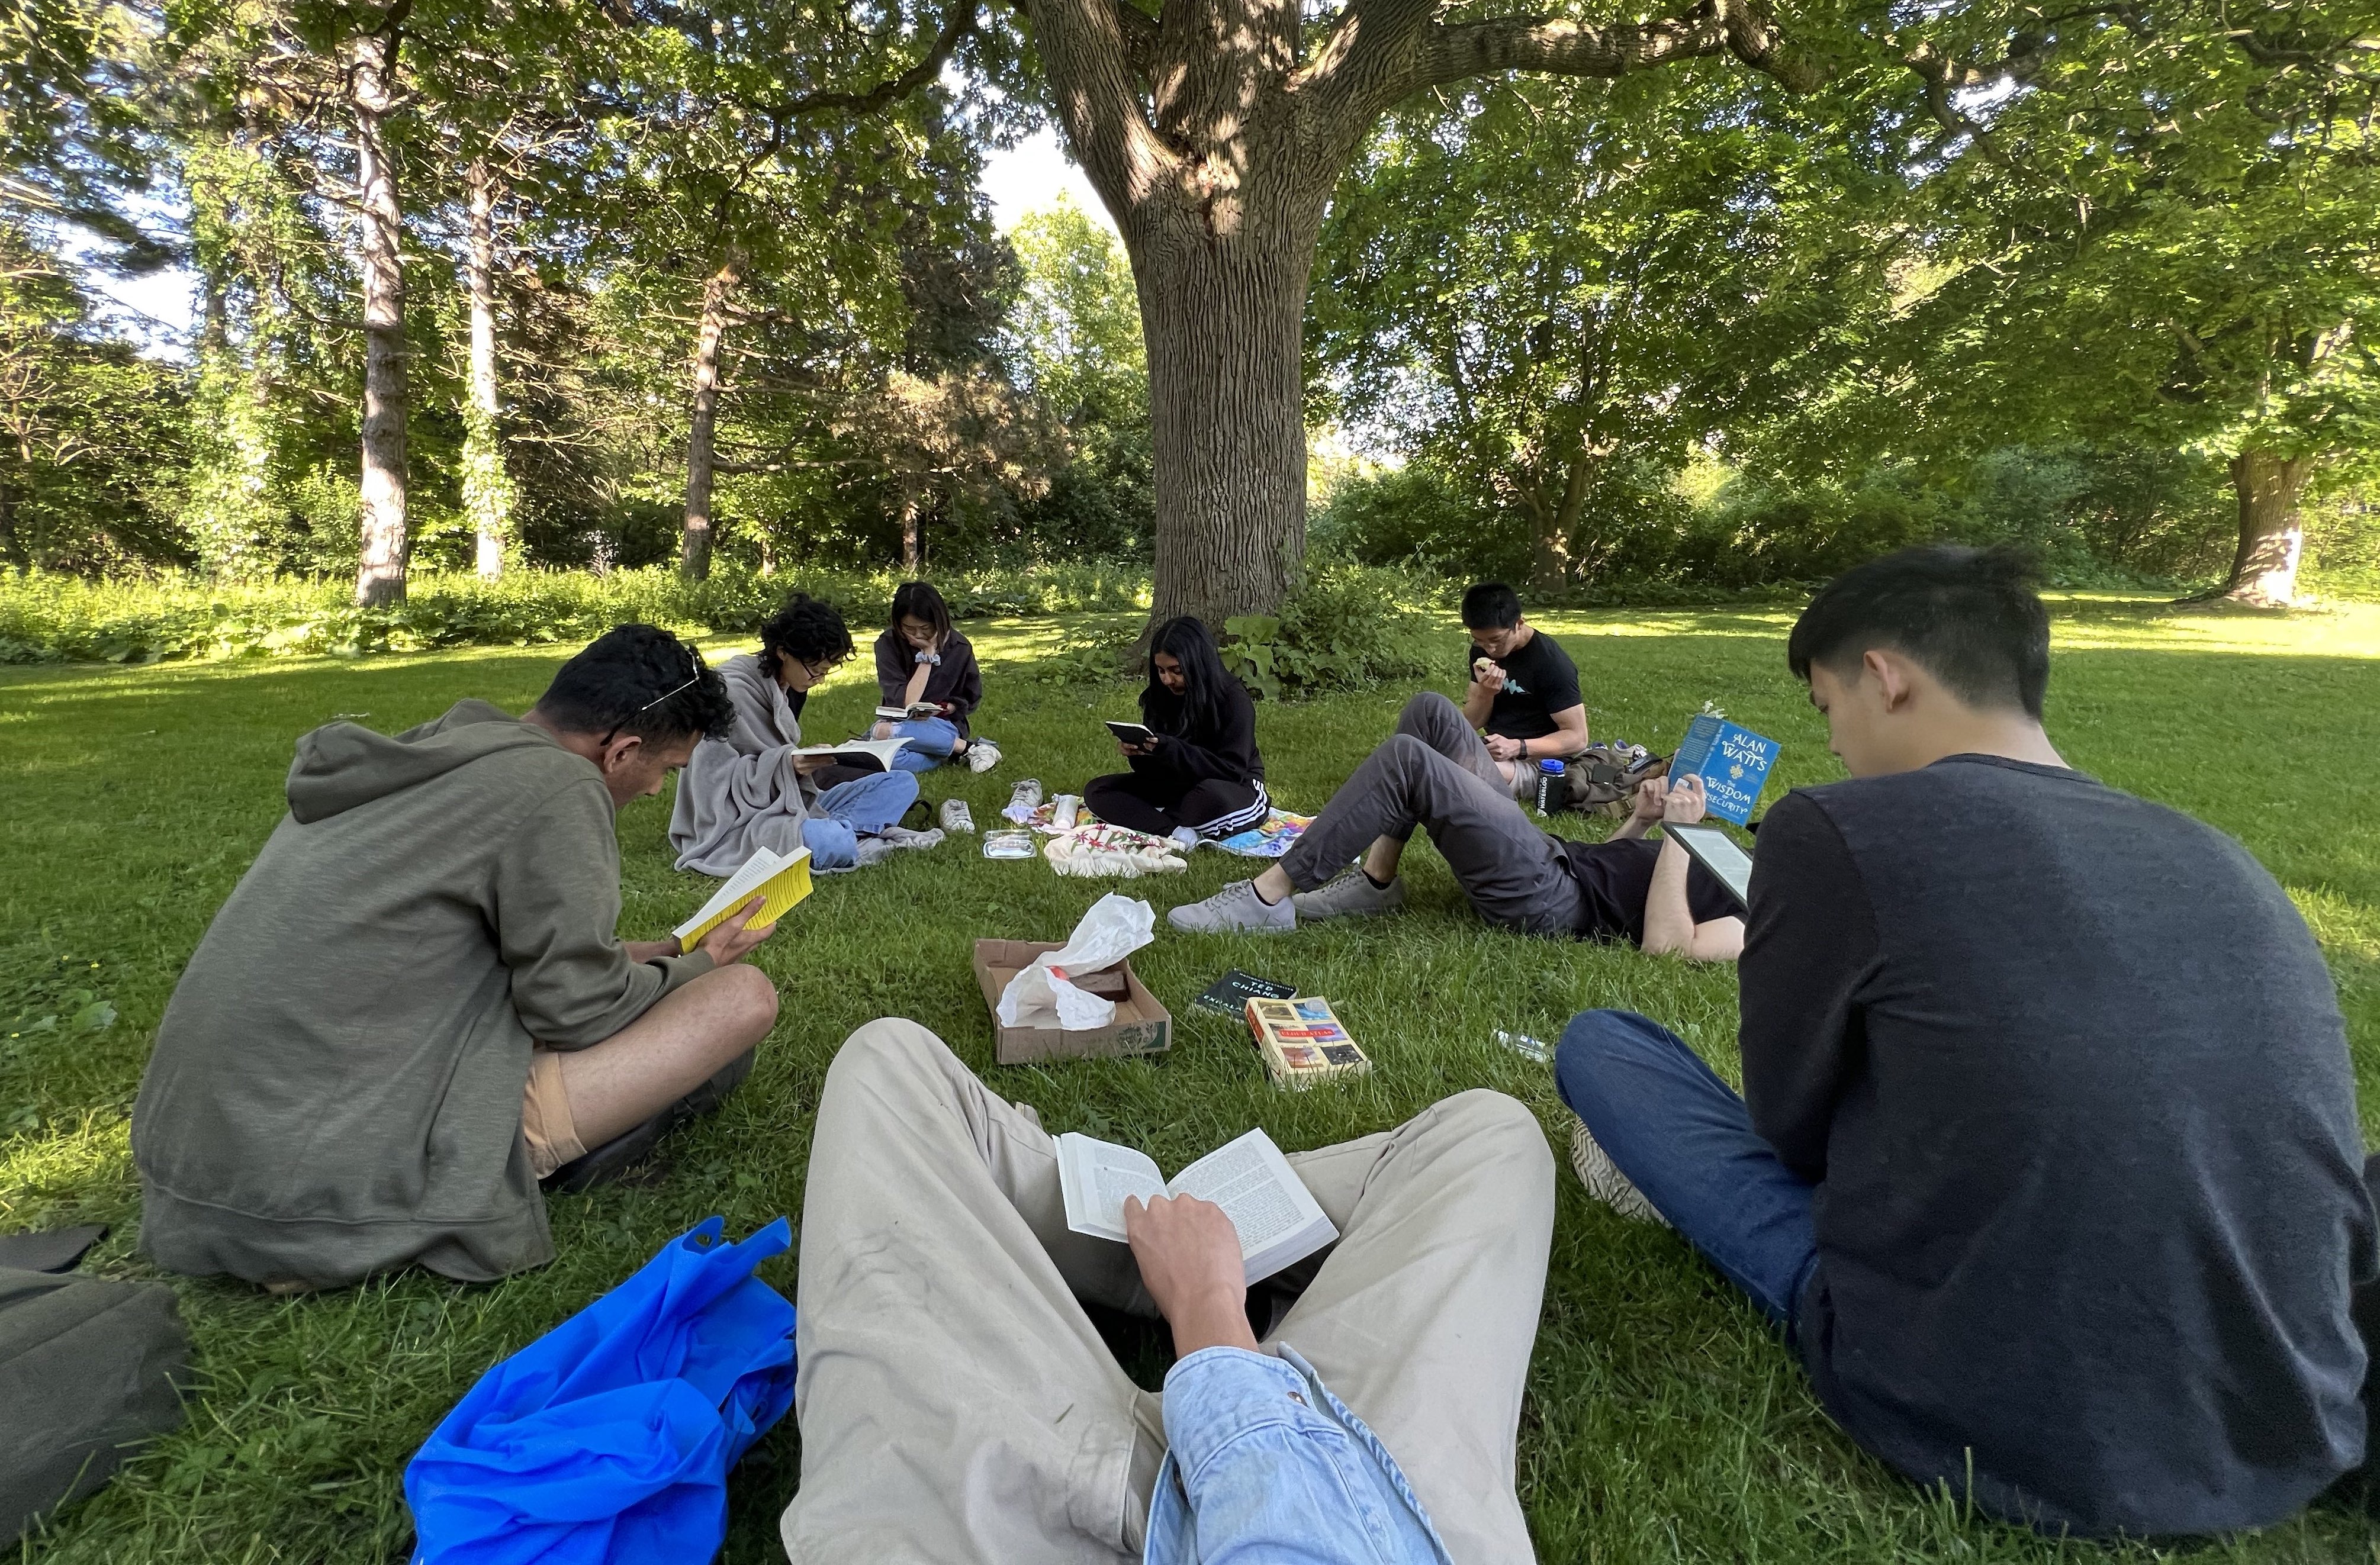 A group of people reading under a tree